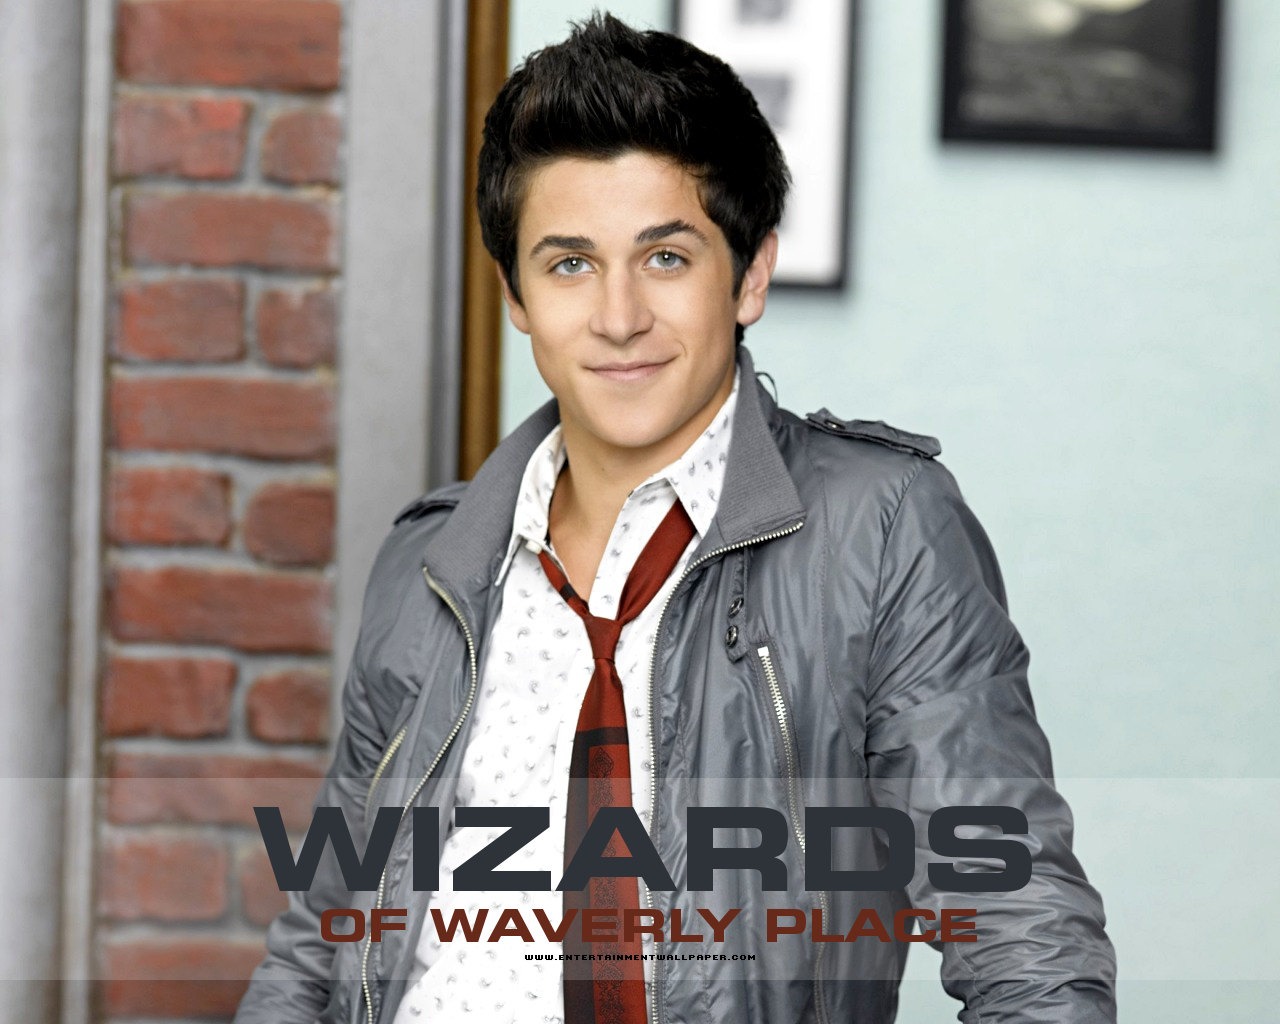 Wizards of Waverly Place Tapete #12 - 1280x1024